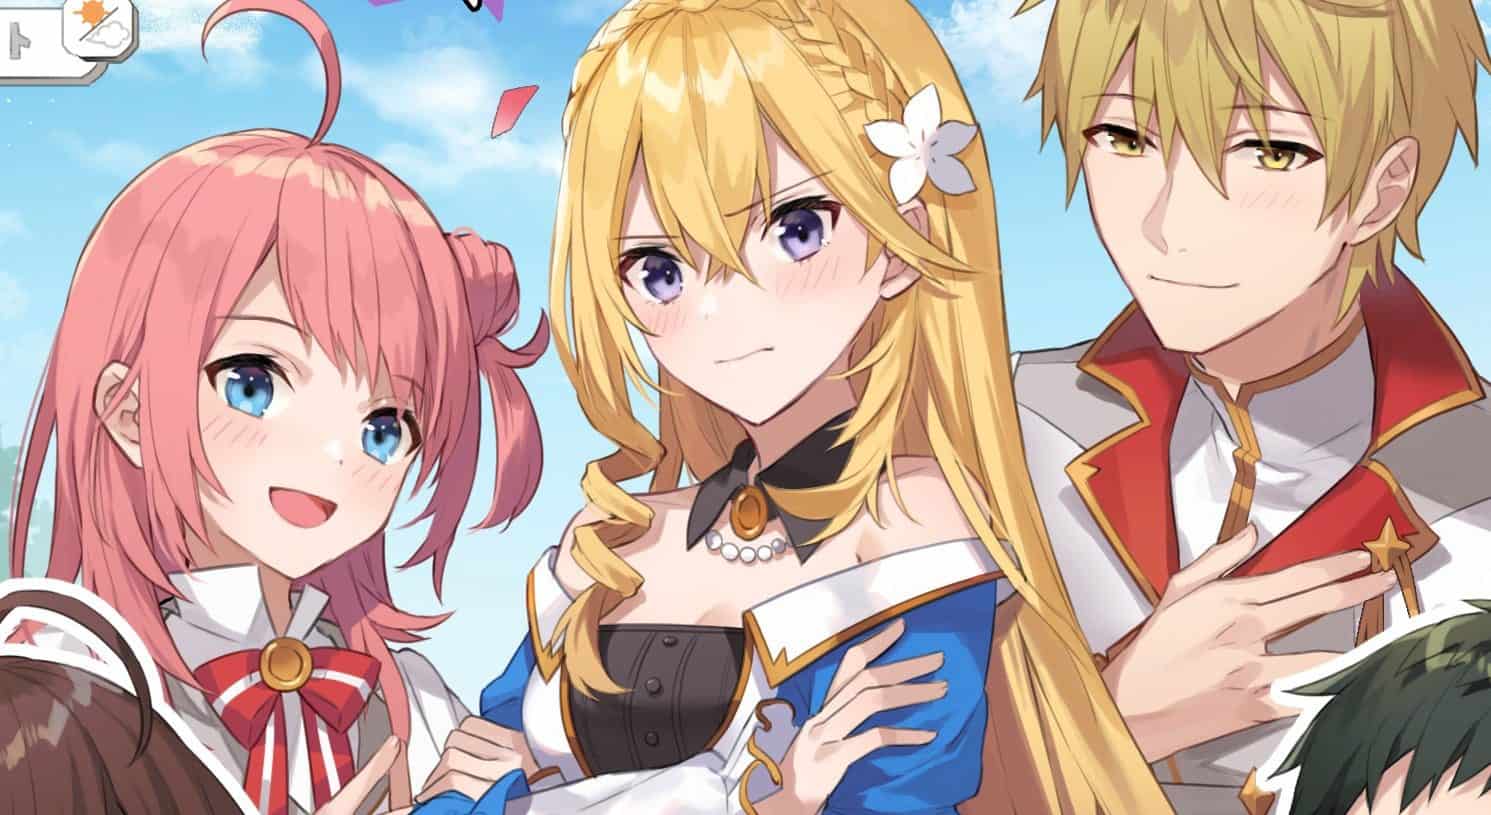 The three main characters of the game